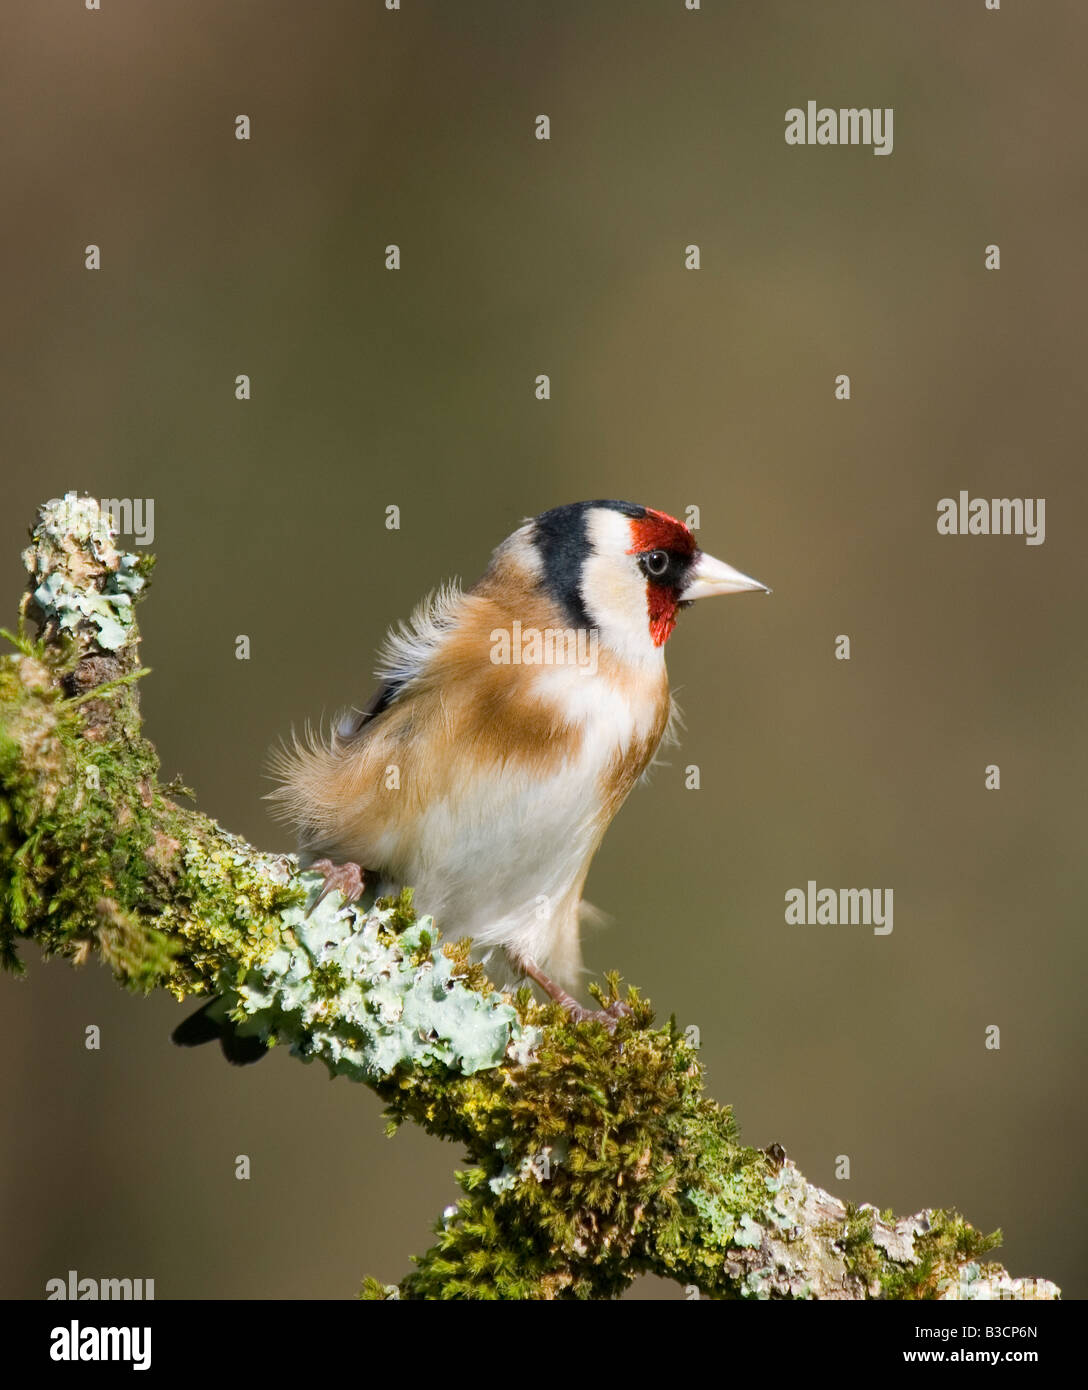 Goldfinch with feathers ruffled by breeze Stock Photo